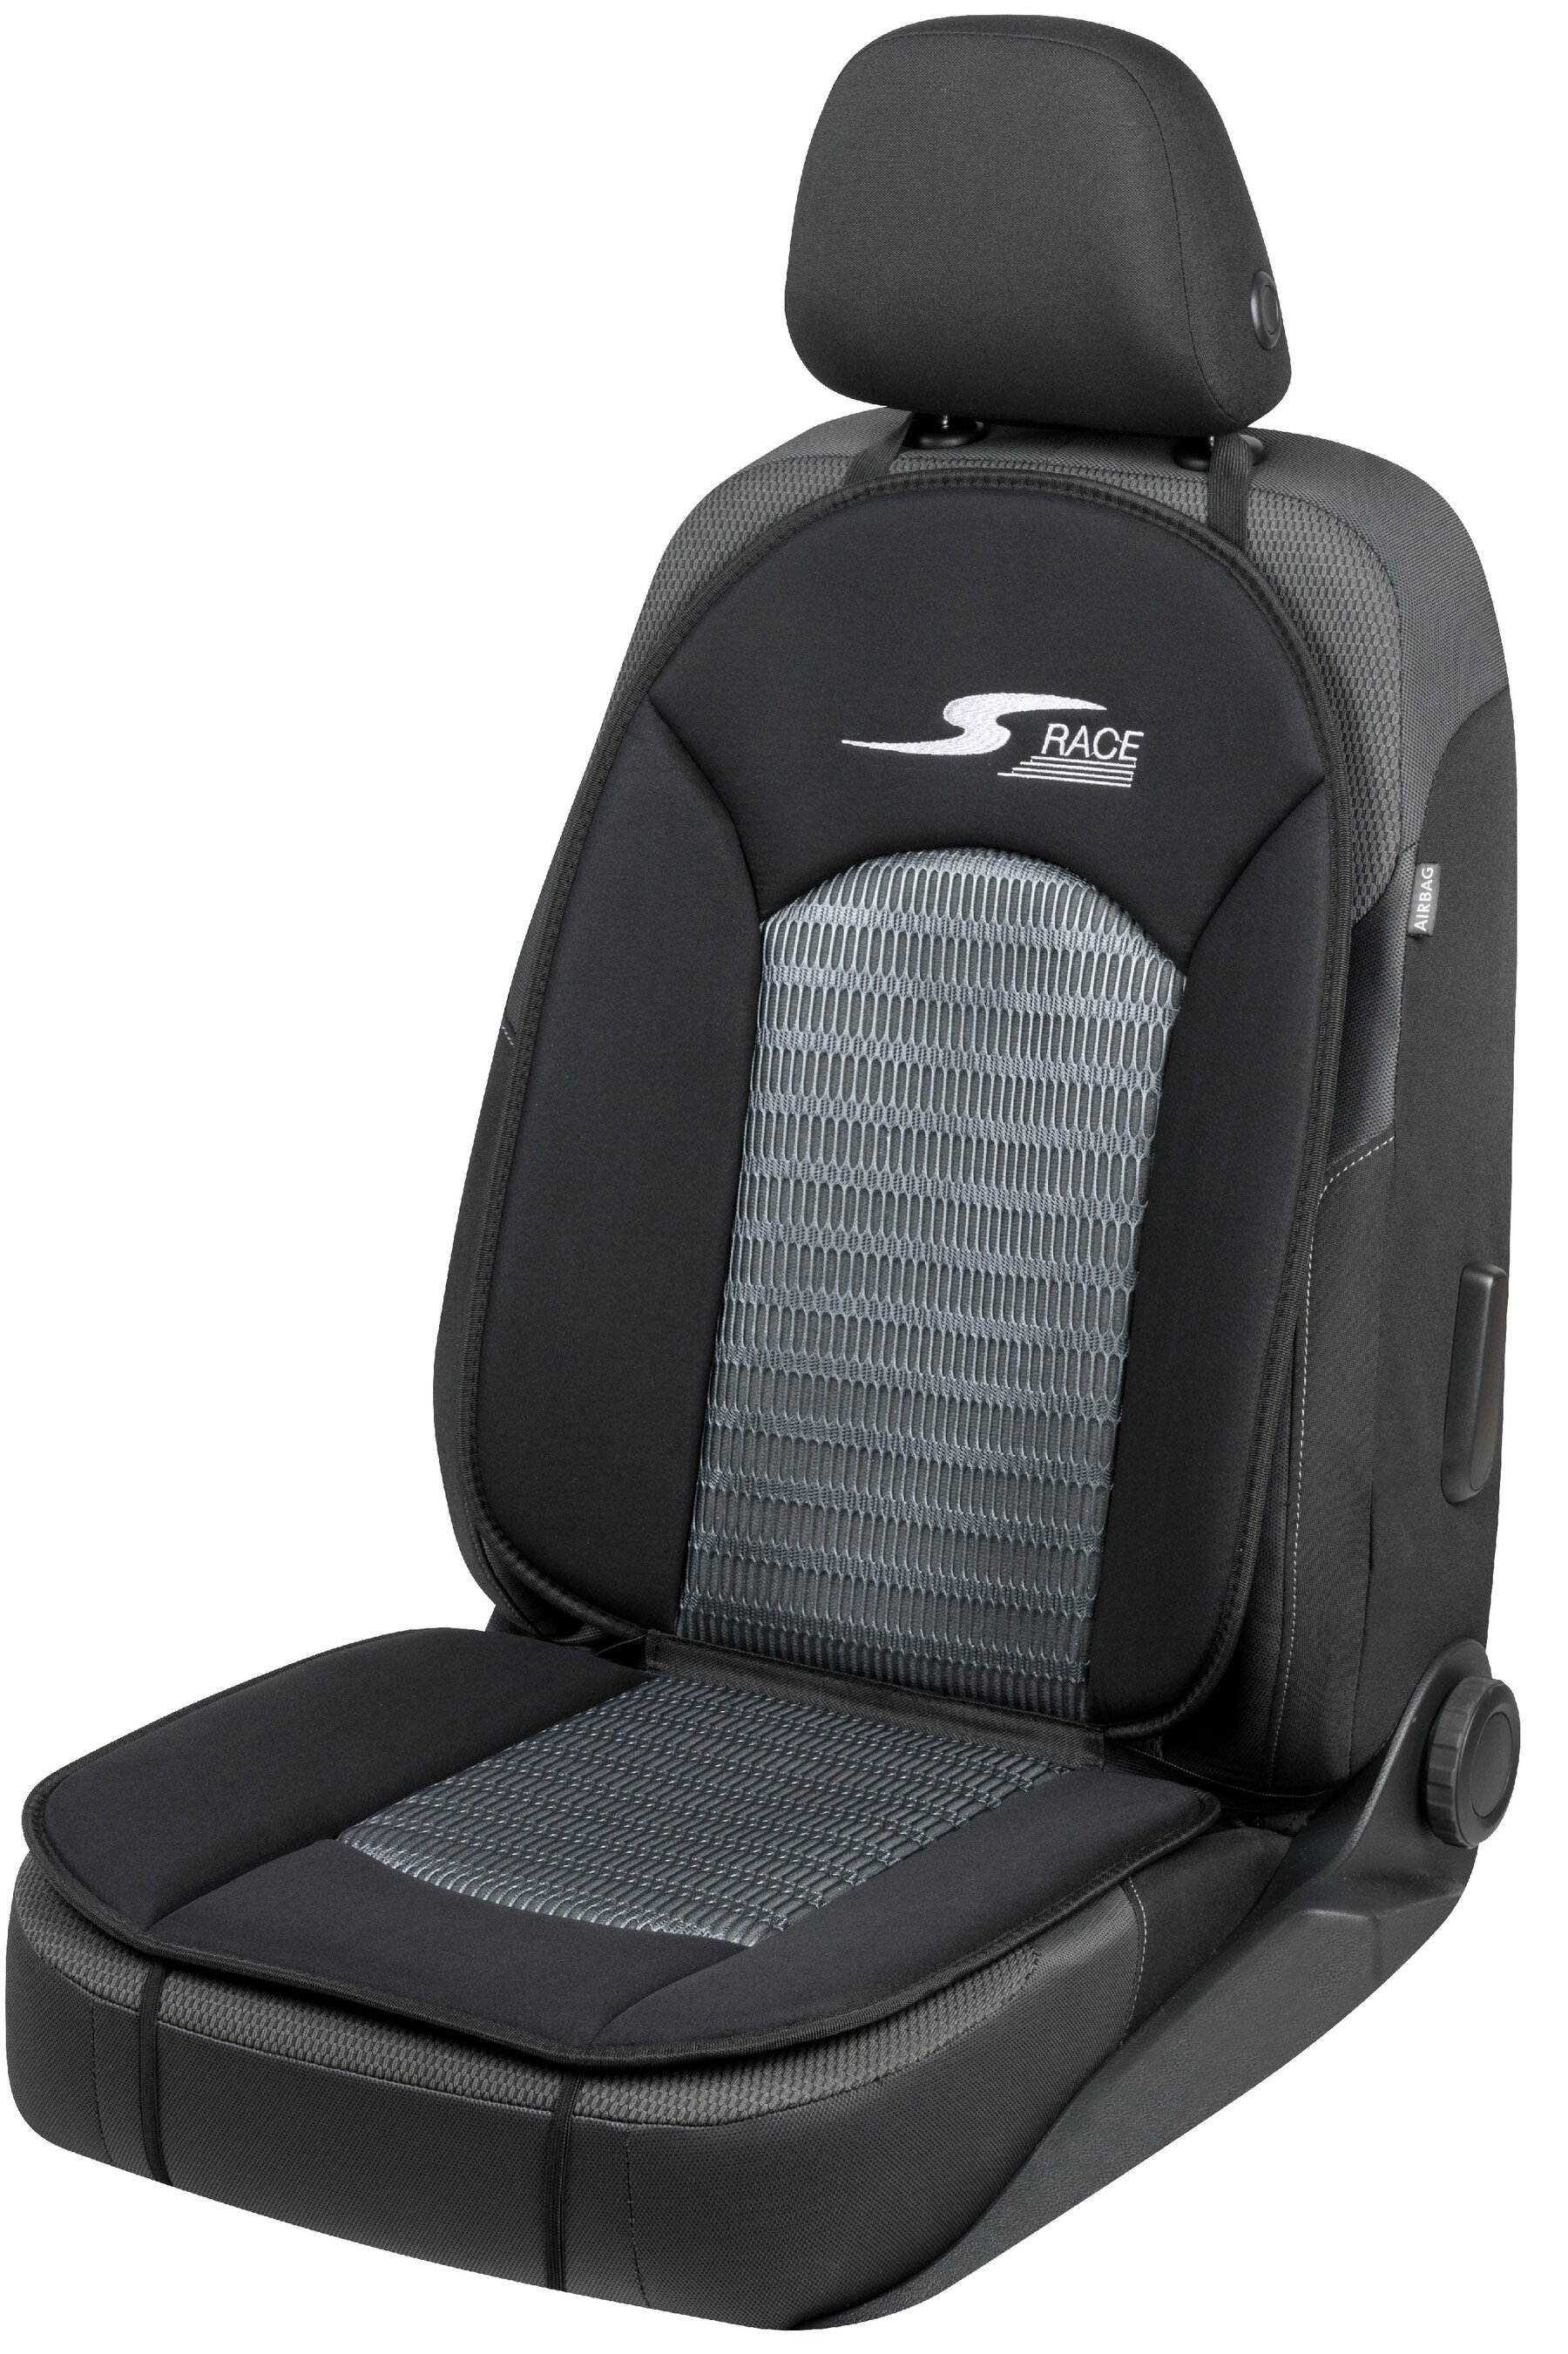 Car Seat cover S-Race anthracite